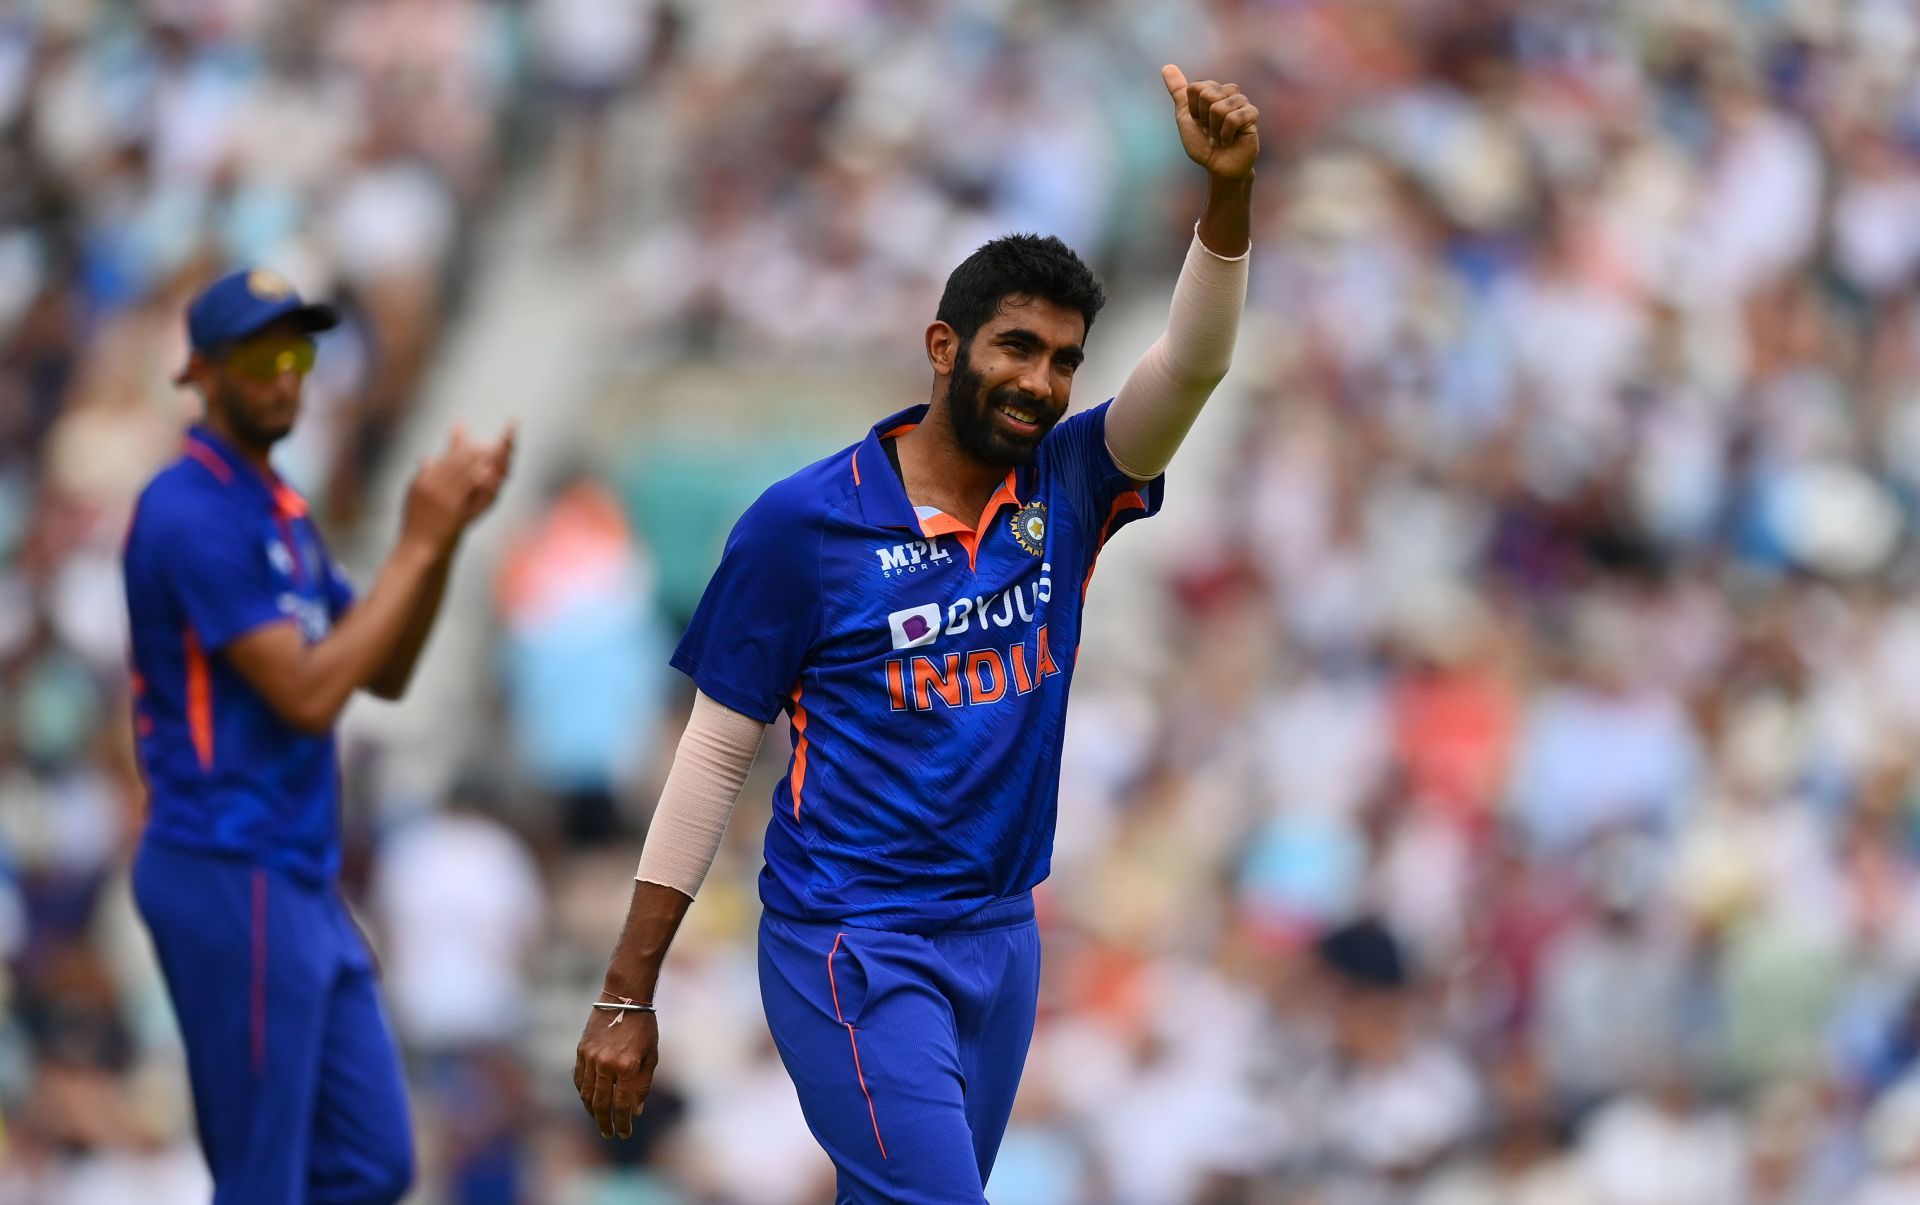 Jasprit Bumrah was lethal with the ball during the ODI series against England